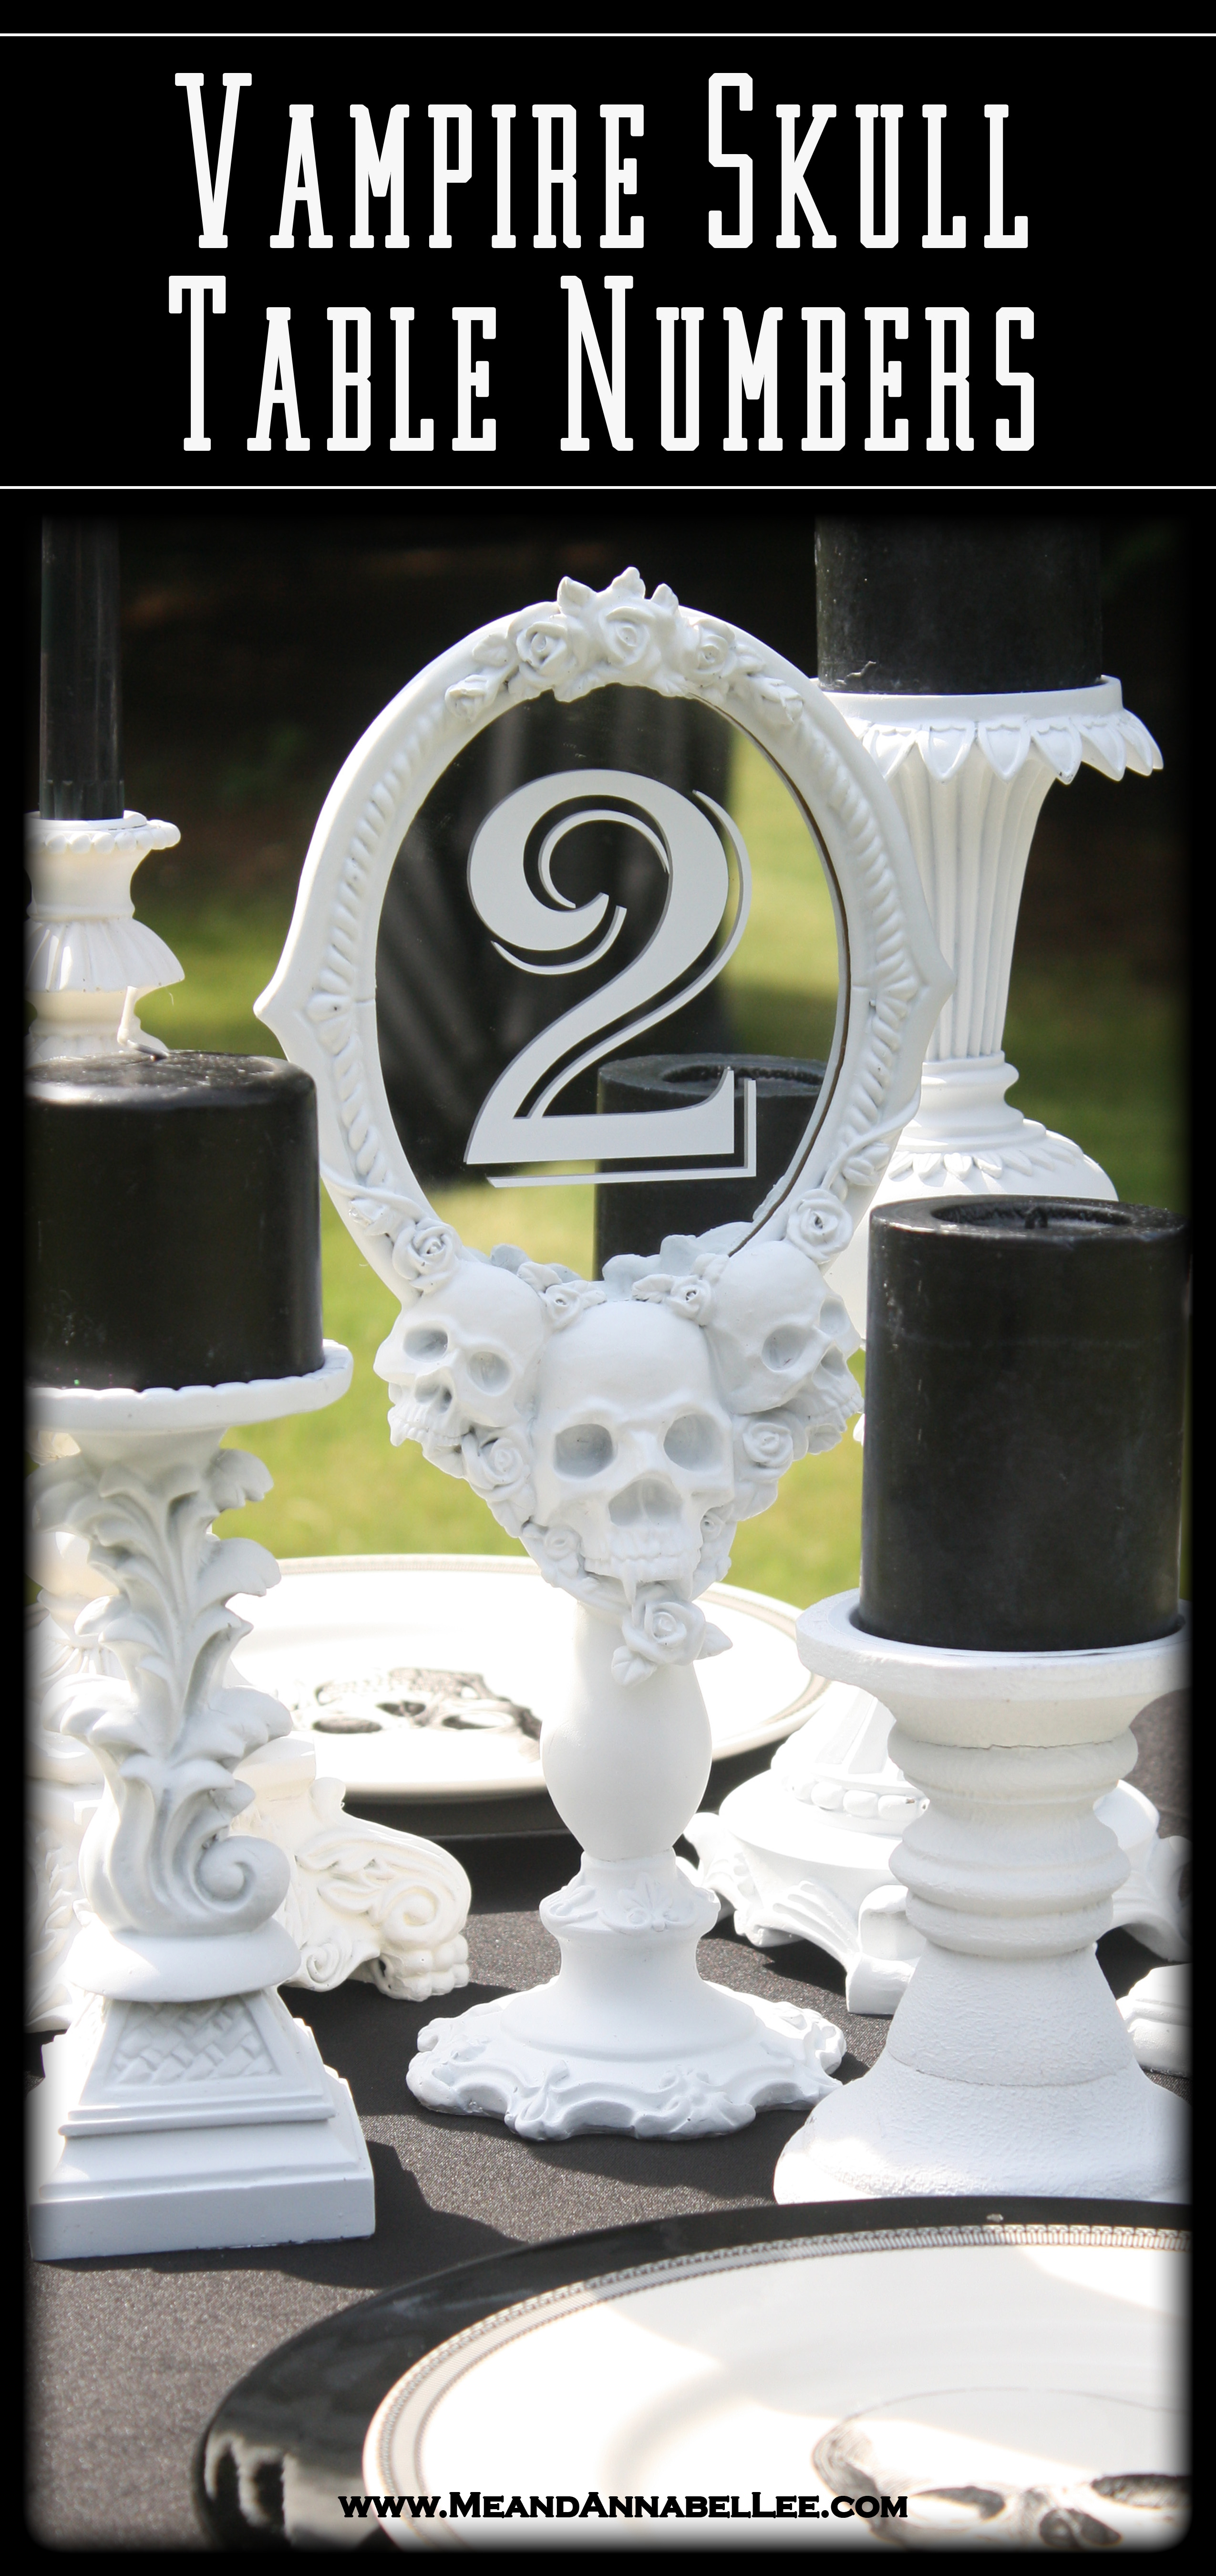 DIY White Vampire Skull Mirror Wedding Table Numbers | Gothic Reception Décor | Black & White Candle Centerpiece | Cricut Design Space Tutorial | Vinyl Numbering | Halloween Nuptials | www.MeandAnnabelLee.com